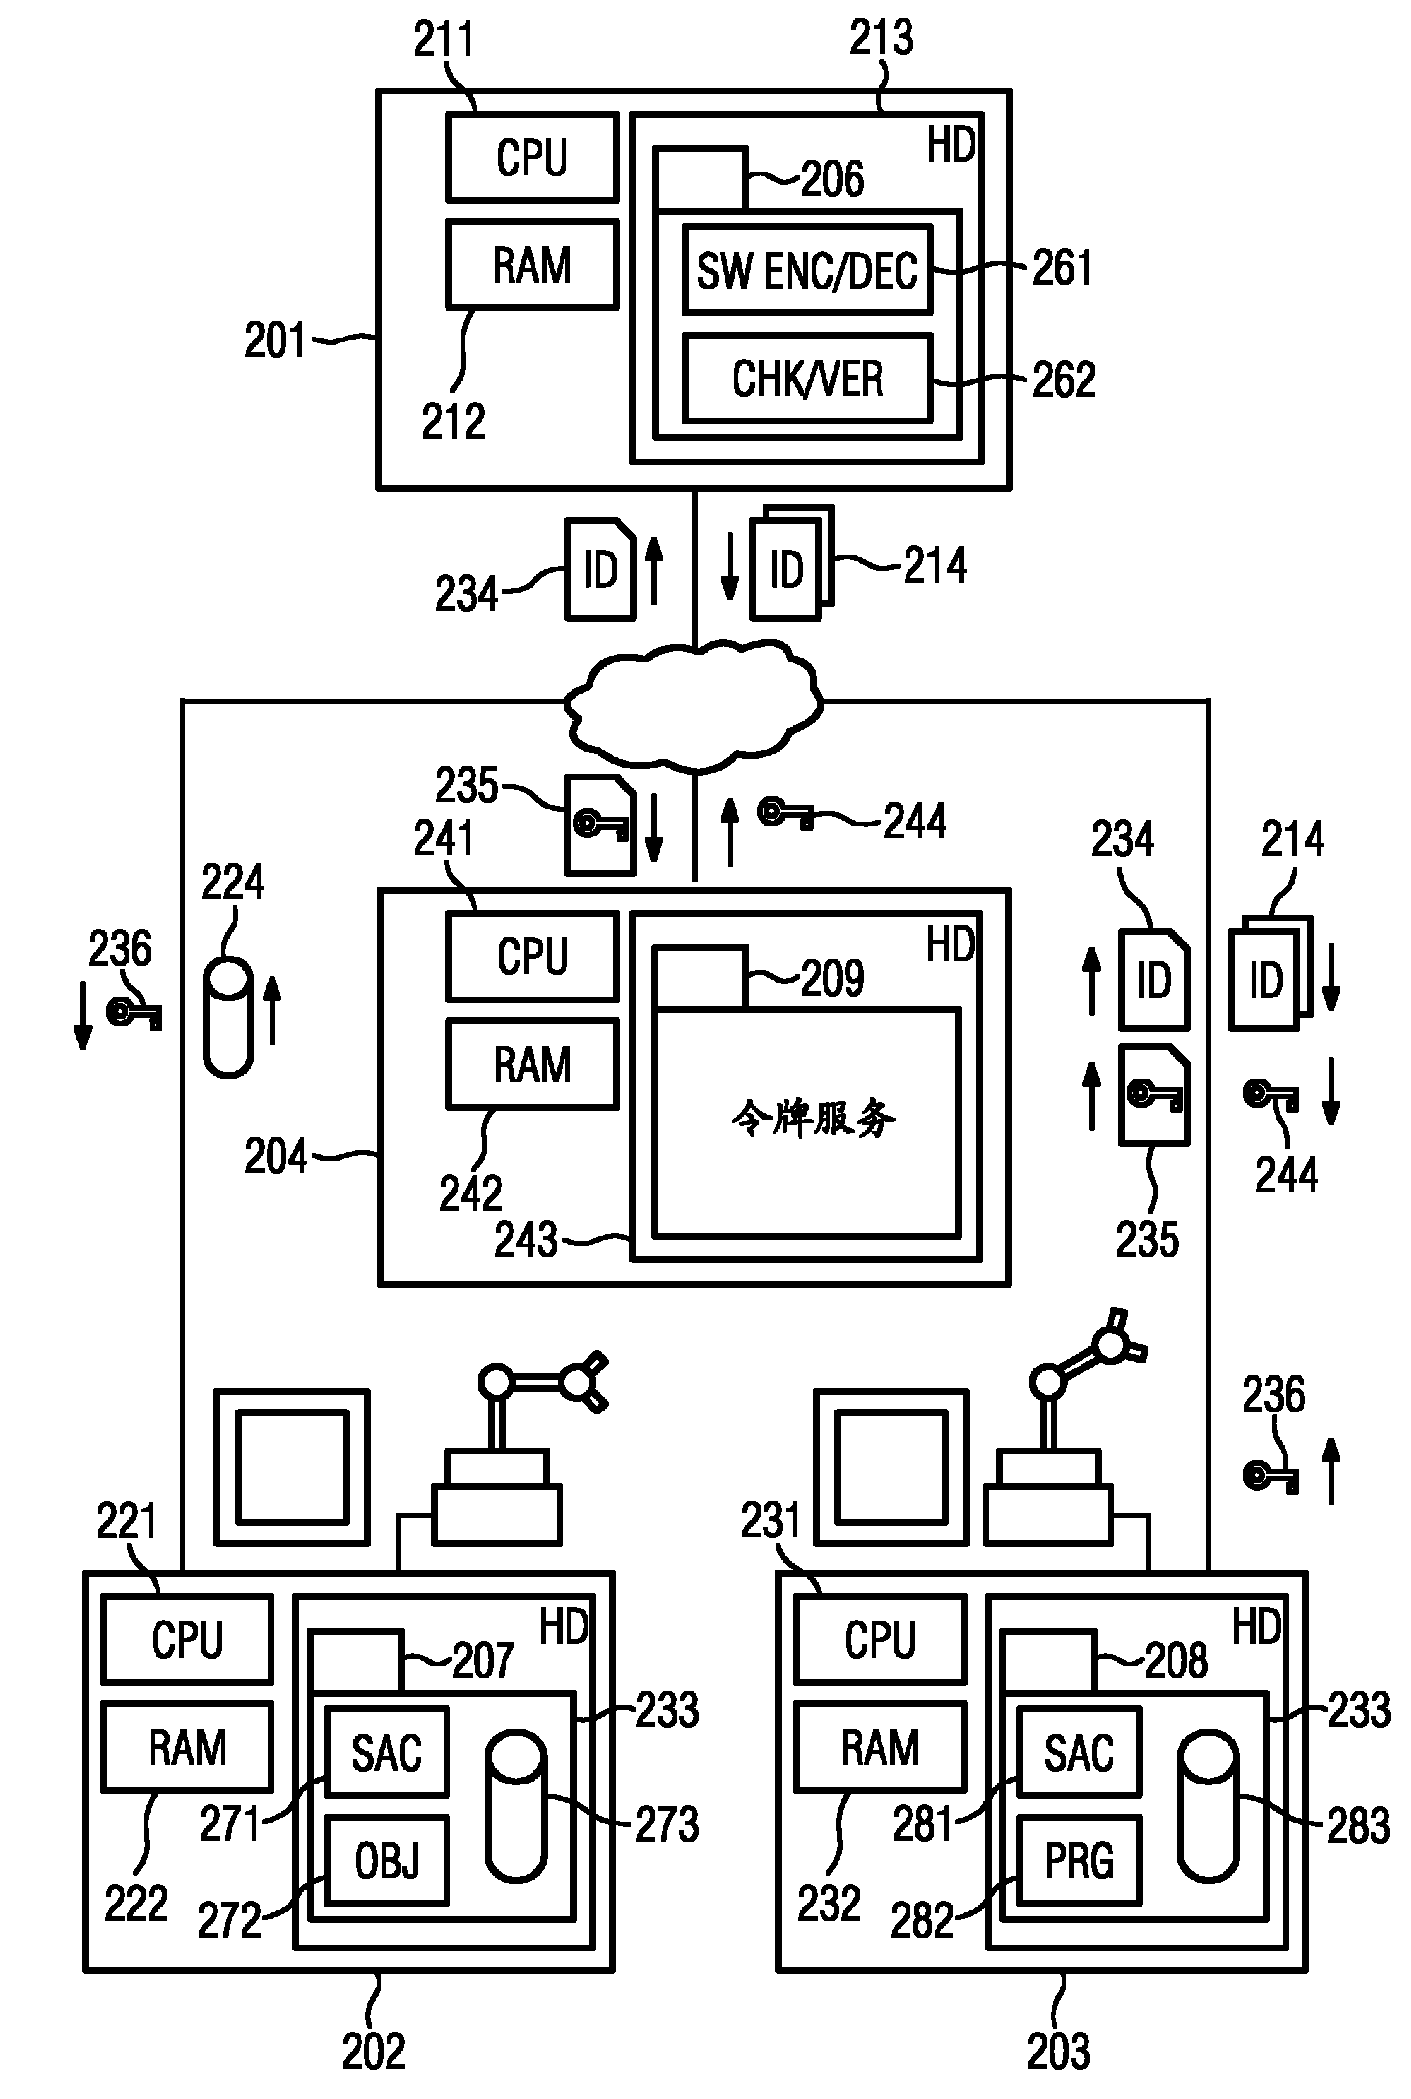 Method for granting authorization to access a computer-based object in an automation system, computer program, and automation system